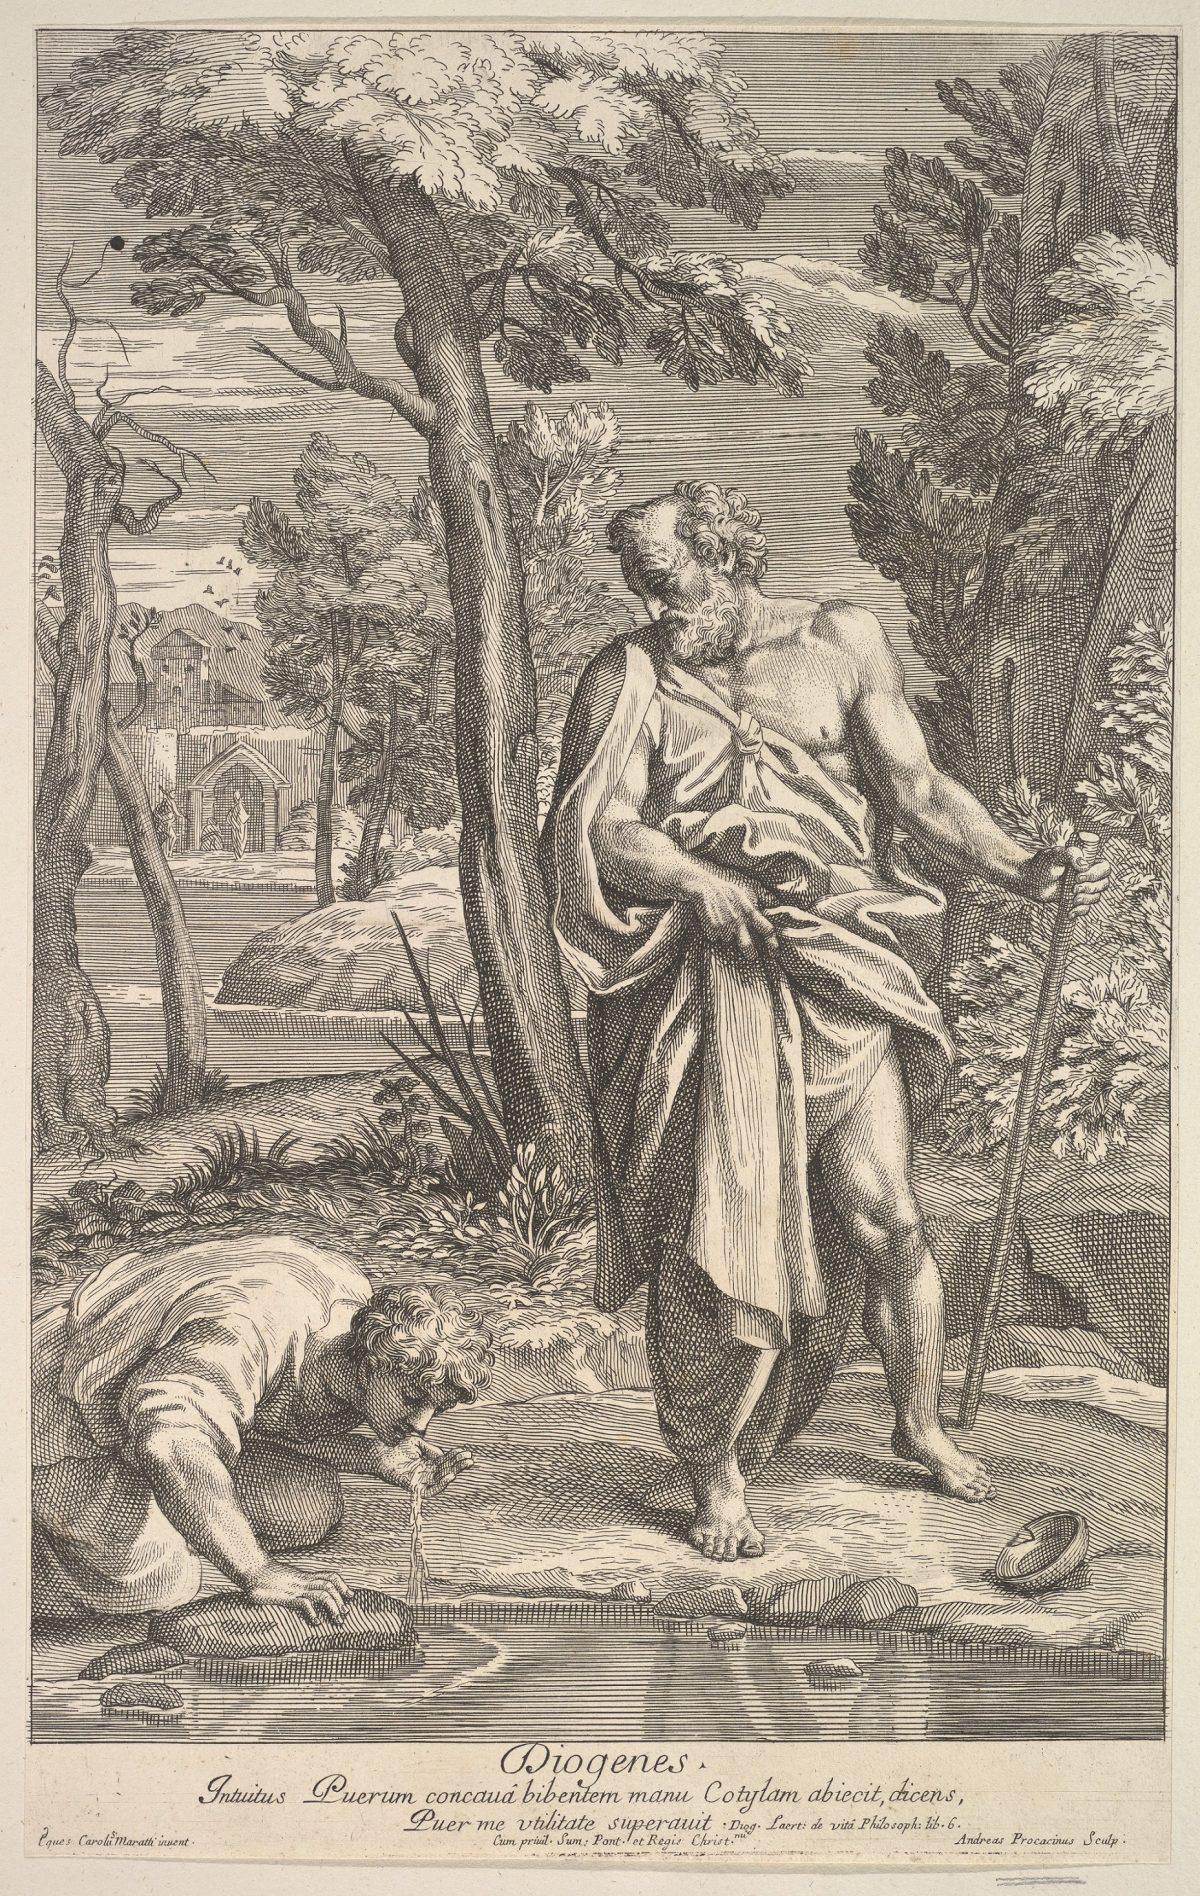 "Diogenes," 1685–1734, by Andrea Procaccini after Carlo Maratti. Etching, 20 11/16 inches by 14 5/8 inches. The Elisha Whittelsey Collection, The Elisha Whittelsey Fund, 1951. (The Metropolitan Museum of Art)